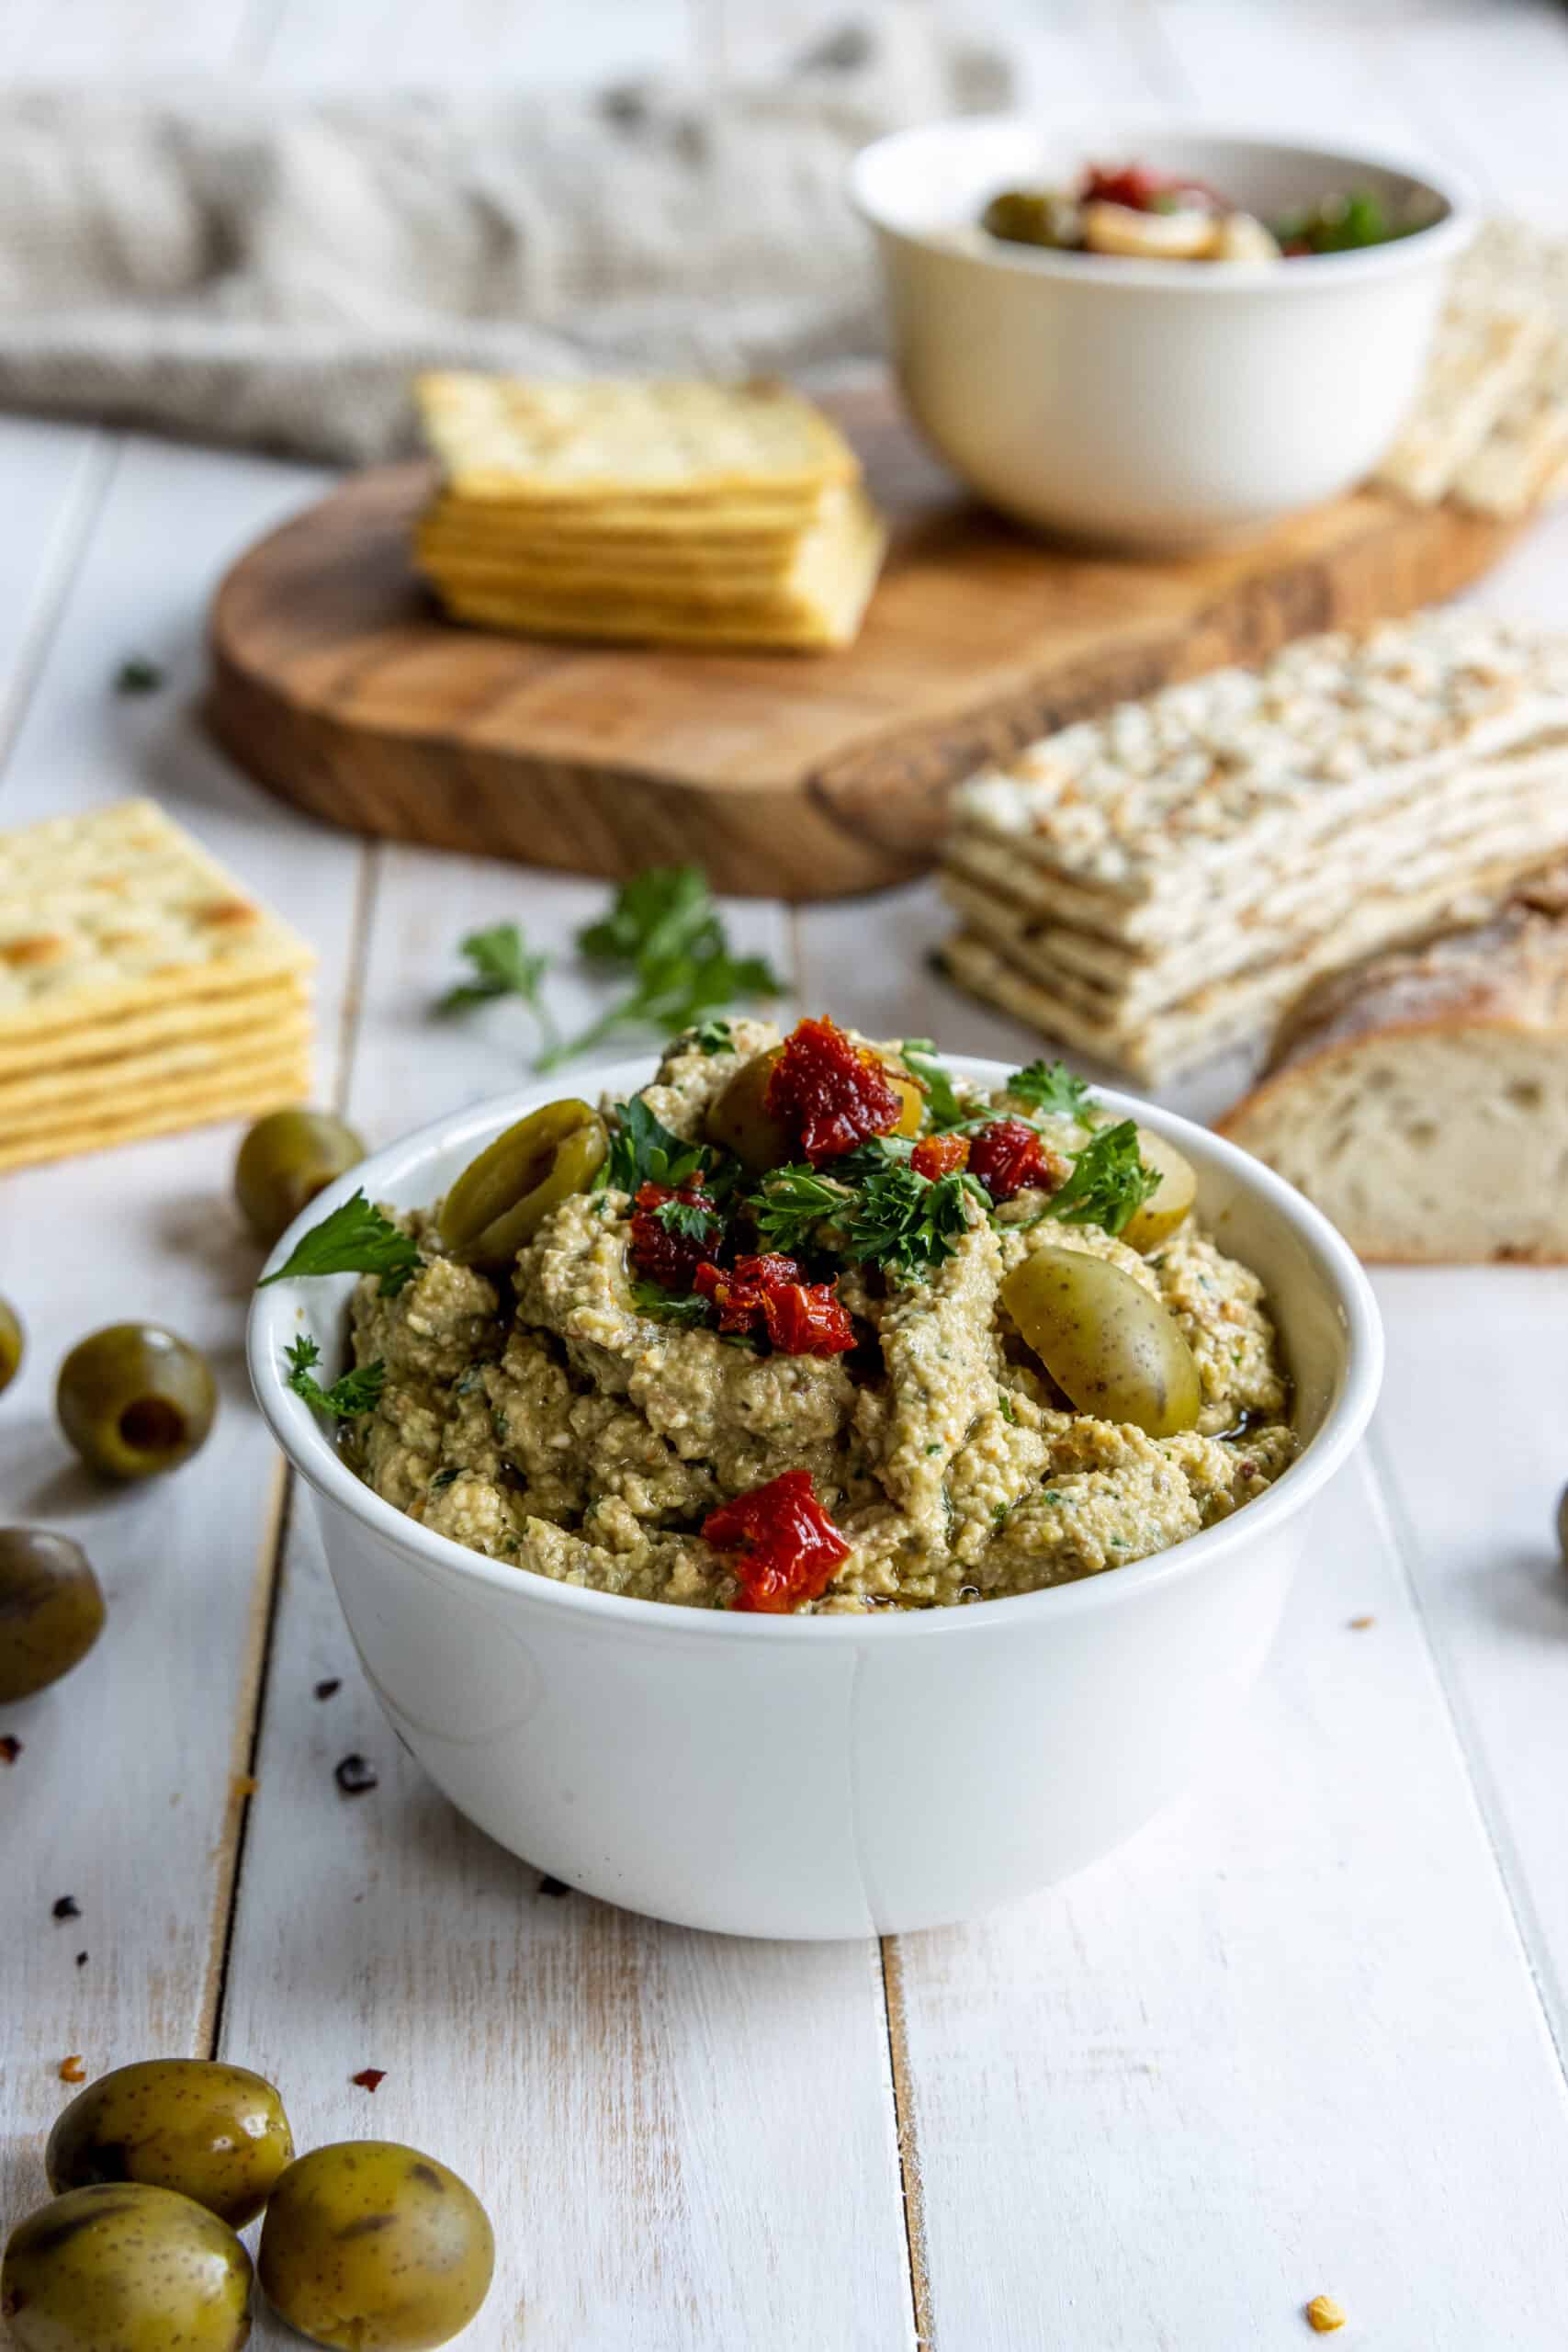 Green or Black Olive Tapenade served in a bowl with Crackers